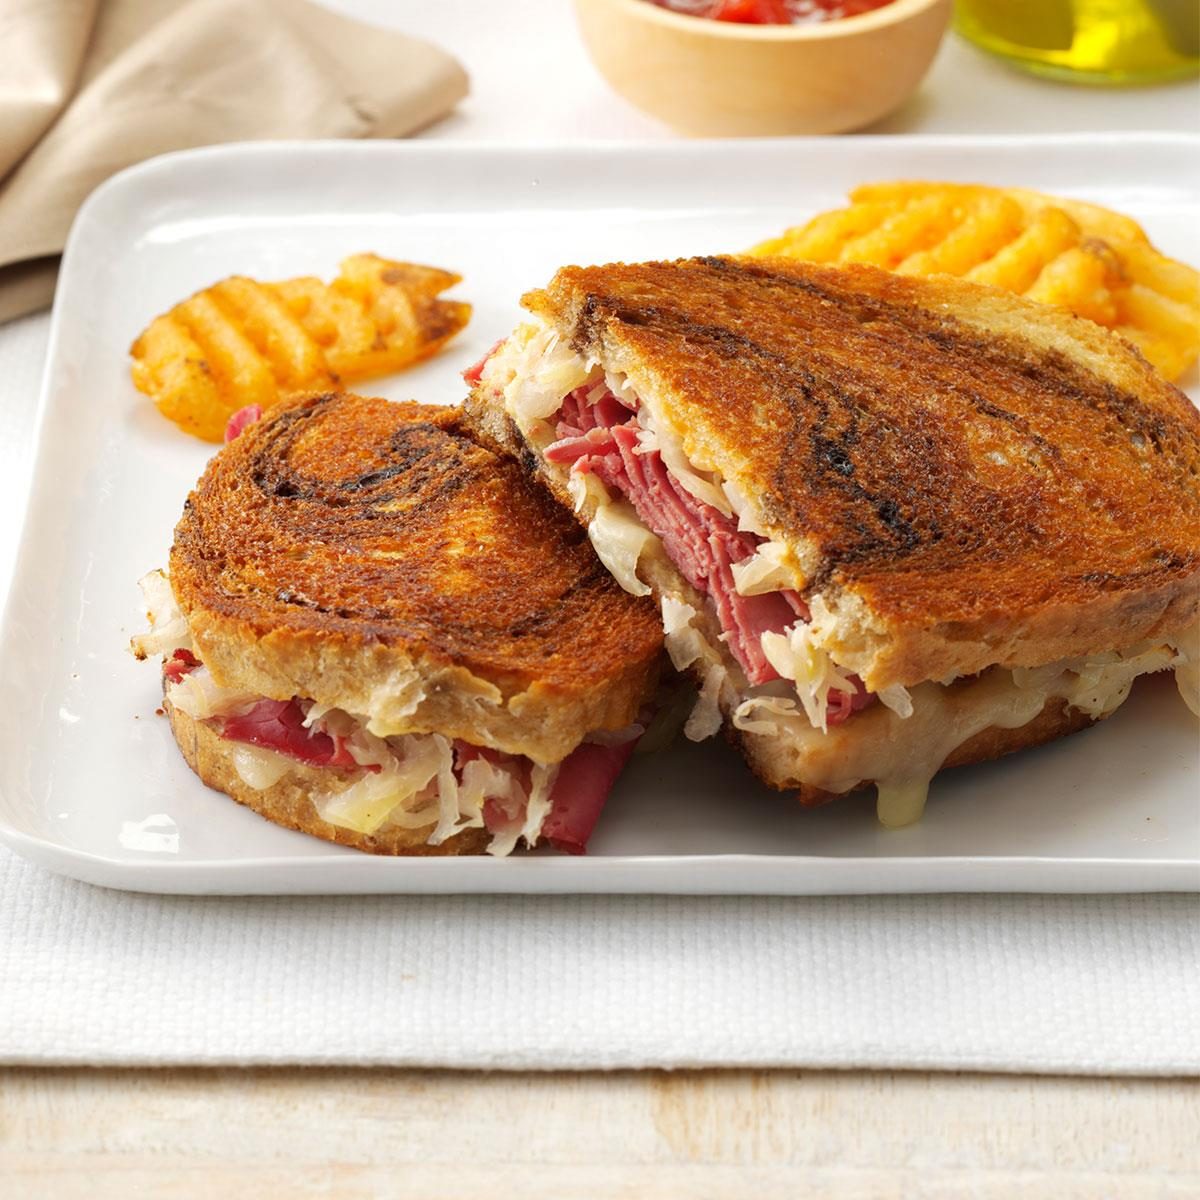 Toasted Reubens Exps19010 Sd143203c10 17 4bc Rms 2